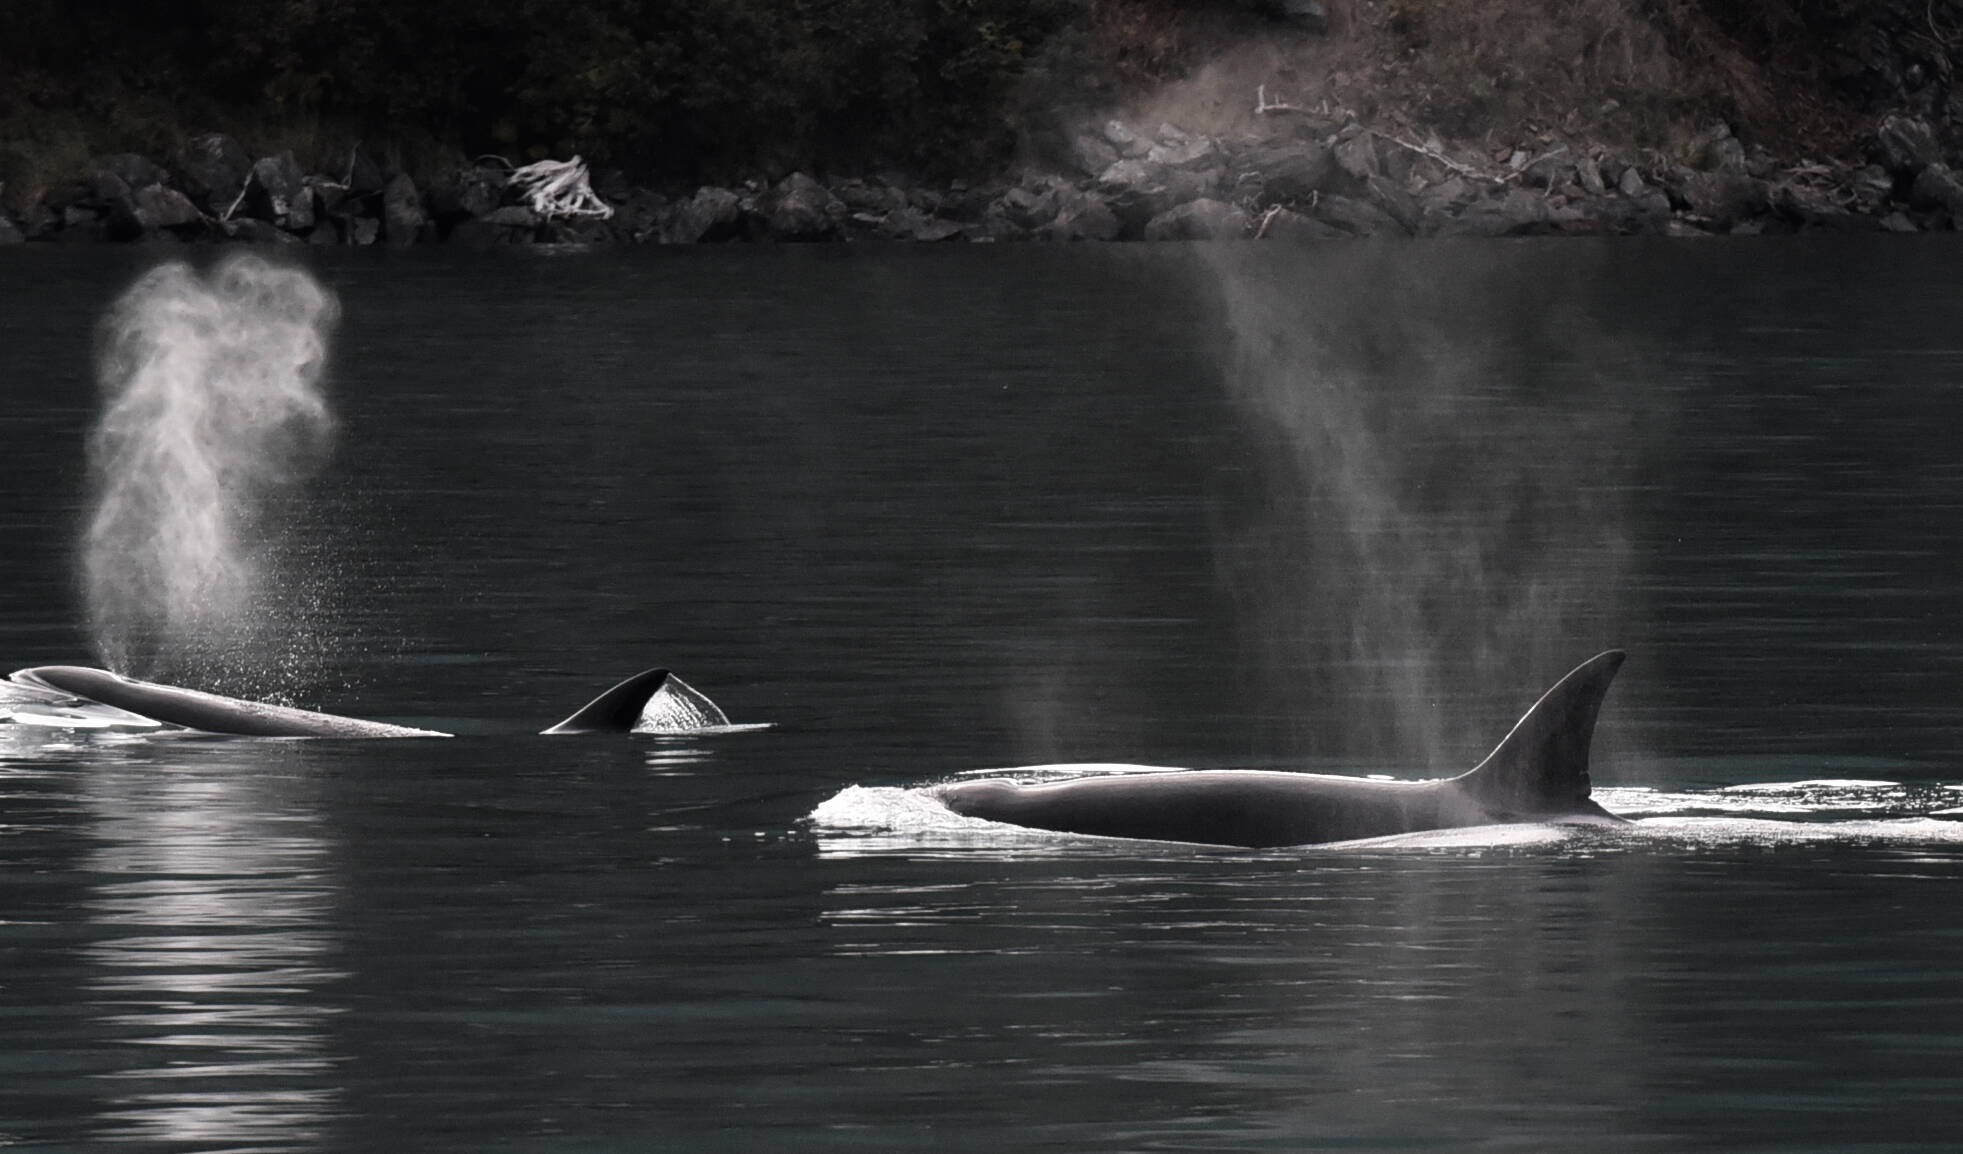 Photo courtesy North Gulf Oceanic Society, NMFS research permit 20341
Killer whales in the Gulf of Alaska. Killer whales often form pods, family groups led by mother whales that can include their babies, those babies’ babies and even great-great grandwhales.